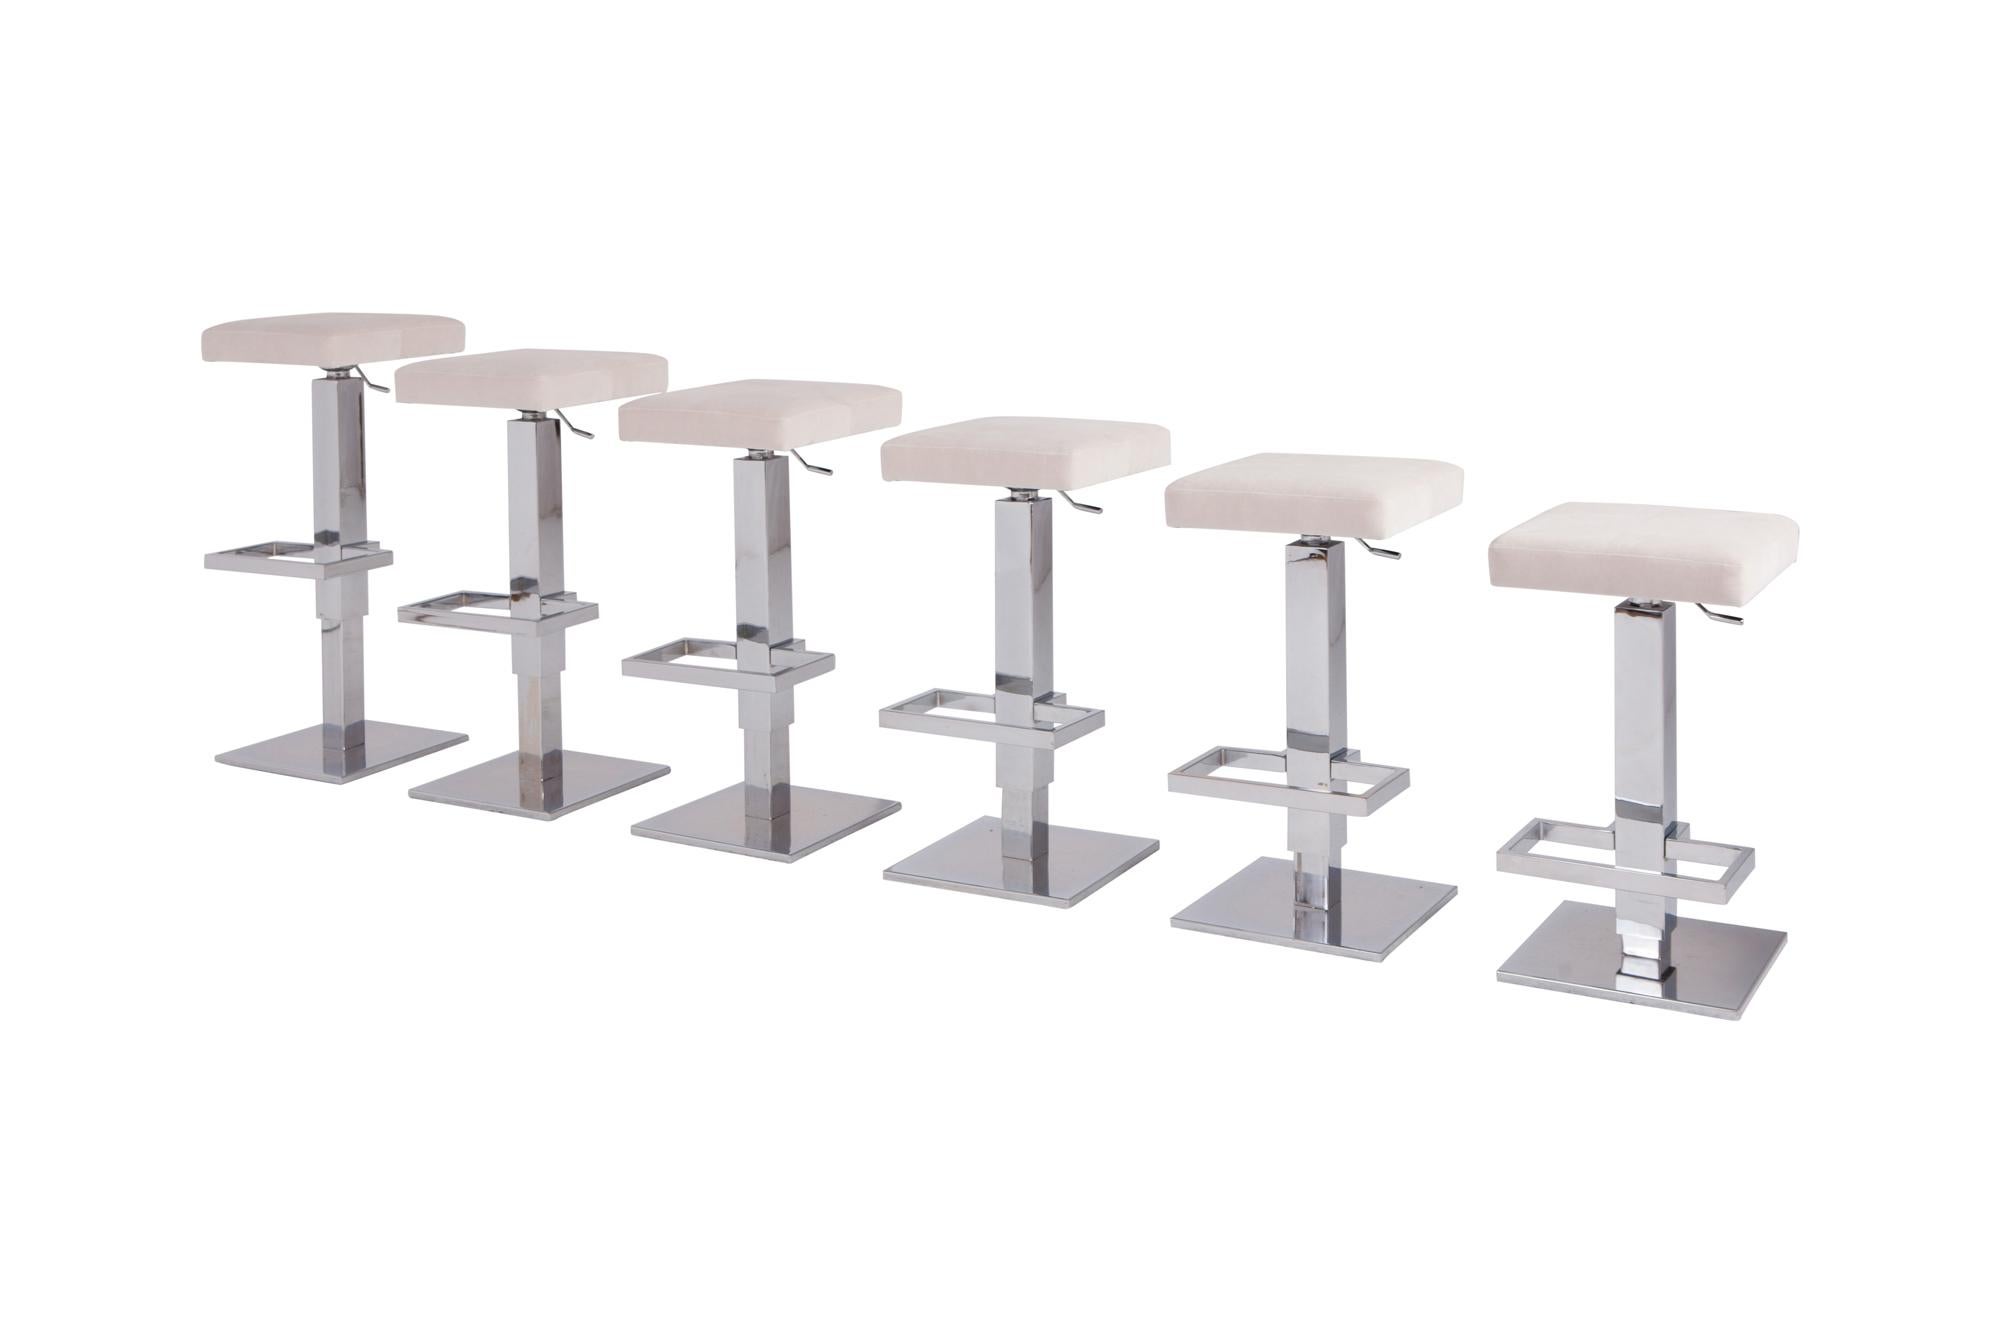 French chromed bar stools in great condition by Maison Jansen.
Upholstered by our craftsmen in a white velvet.

France, 1970s

Measures: W 37, D 37, H 89, SH 89 (66) cm.